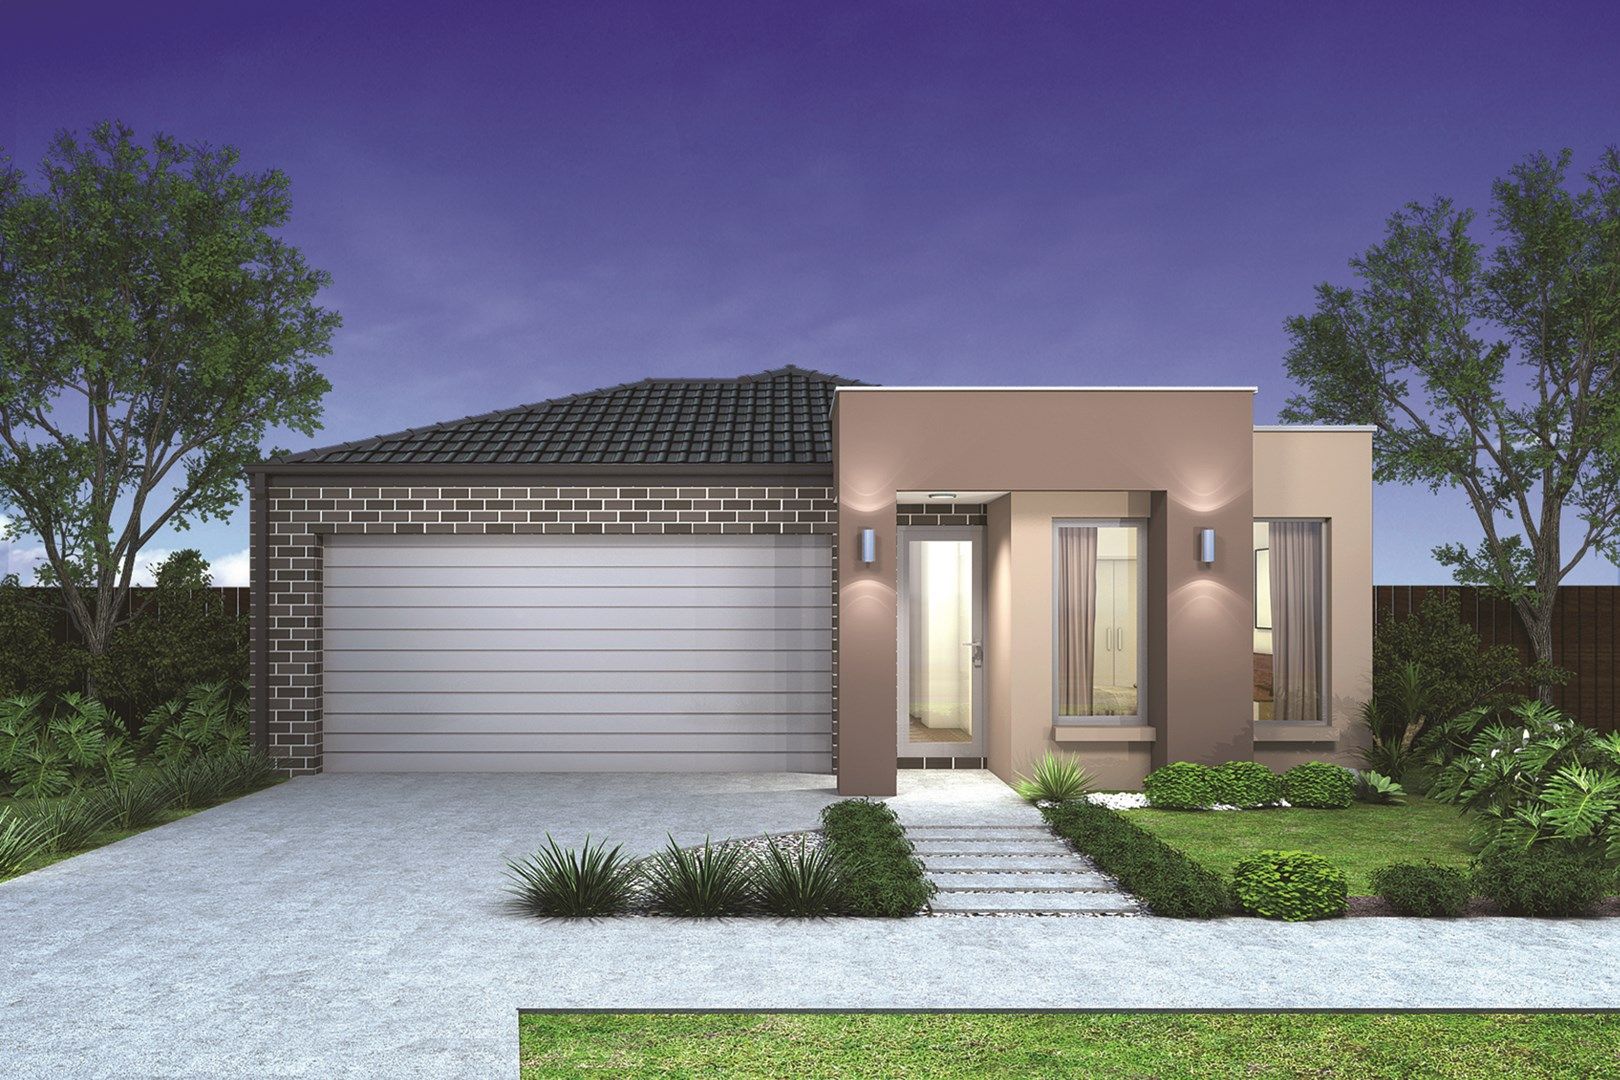 3 bedrooms New House & Land in LOT 645 Taylors Run Estate FRASER RISE VIC, 3336